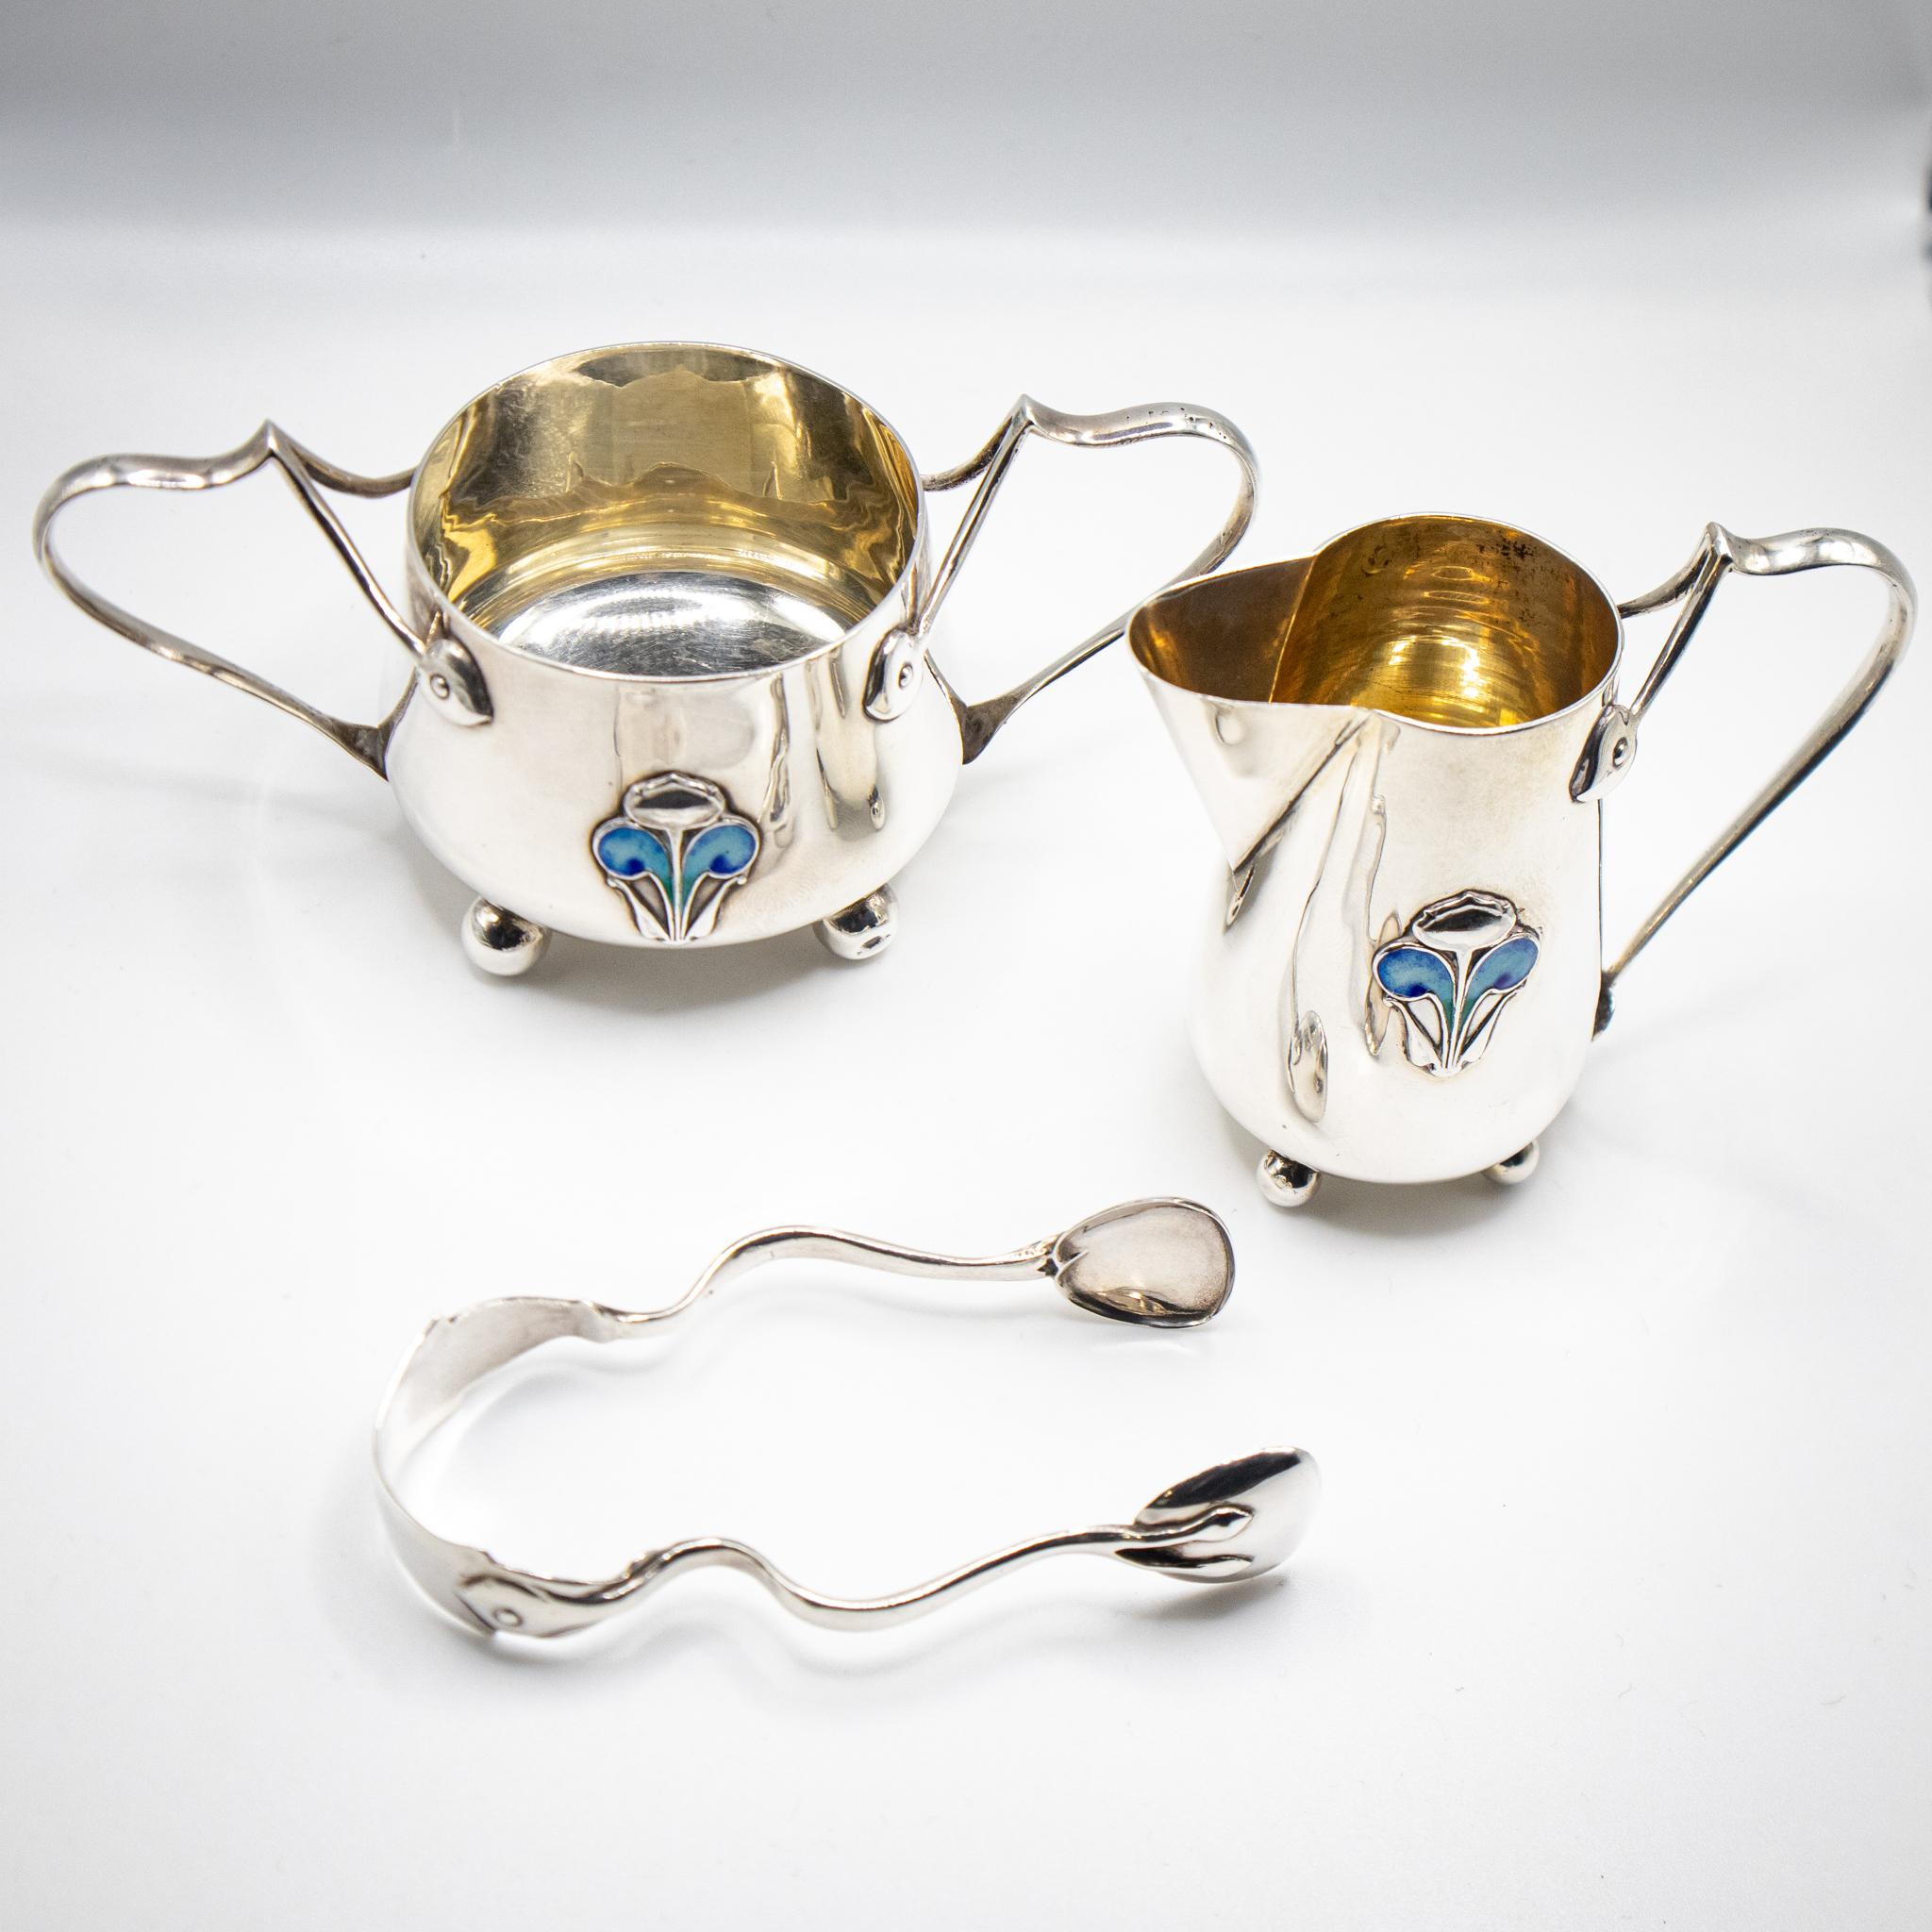 Stunning Art Nouveau Silver Bachelor Trio. This exquisite and diminutive Art Nouveau silver bachelor trio, crafted by James Fenton in Birmingham, 1906, epitomizes elegance and craftsmanship of the era. Adorned with delicate blue enamel floral